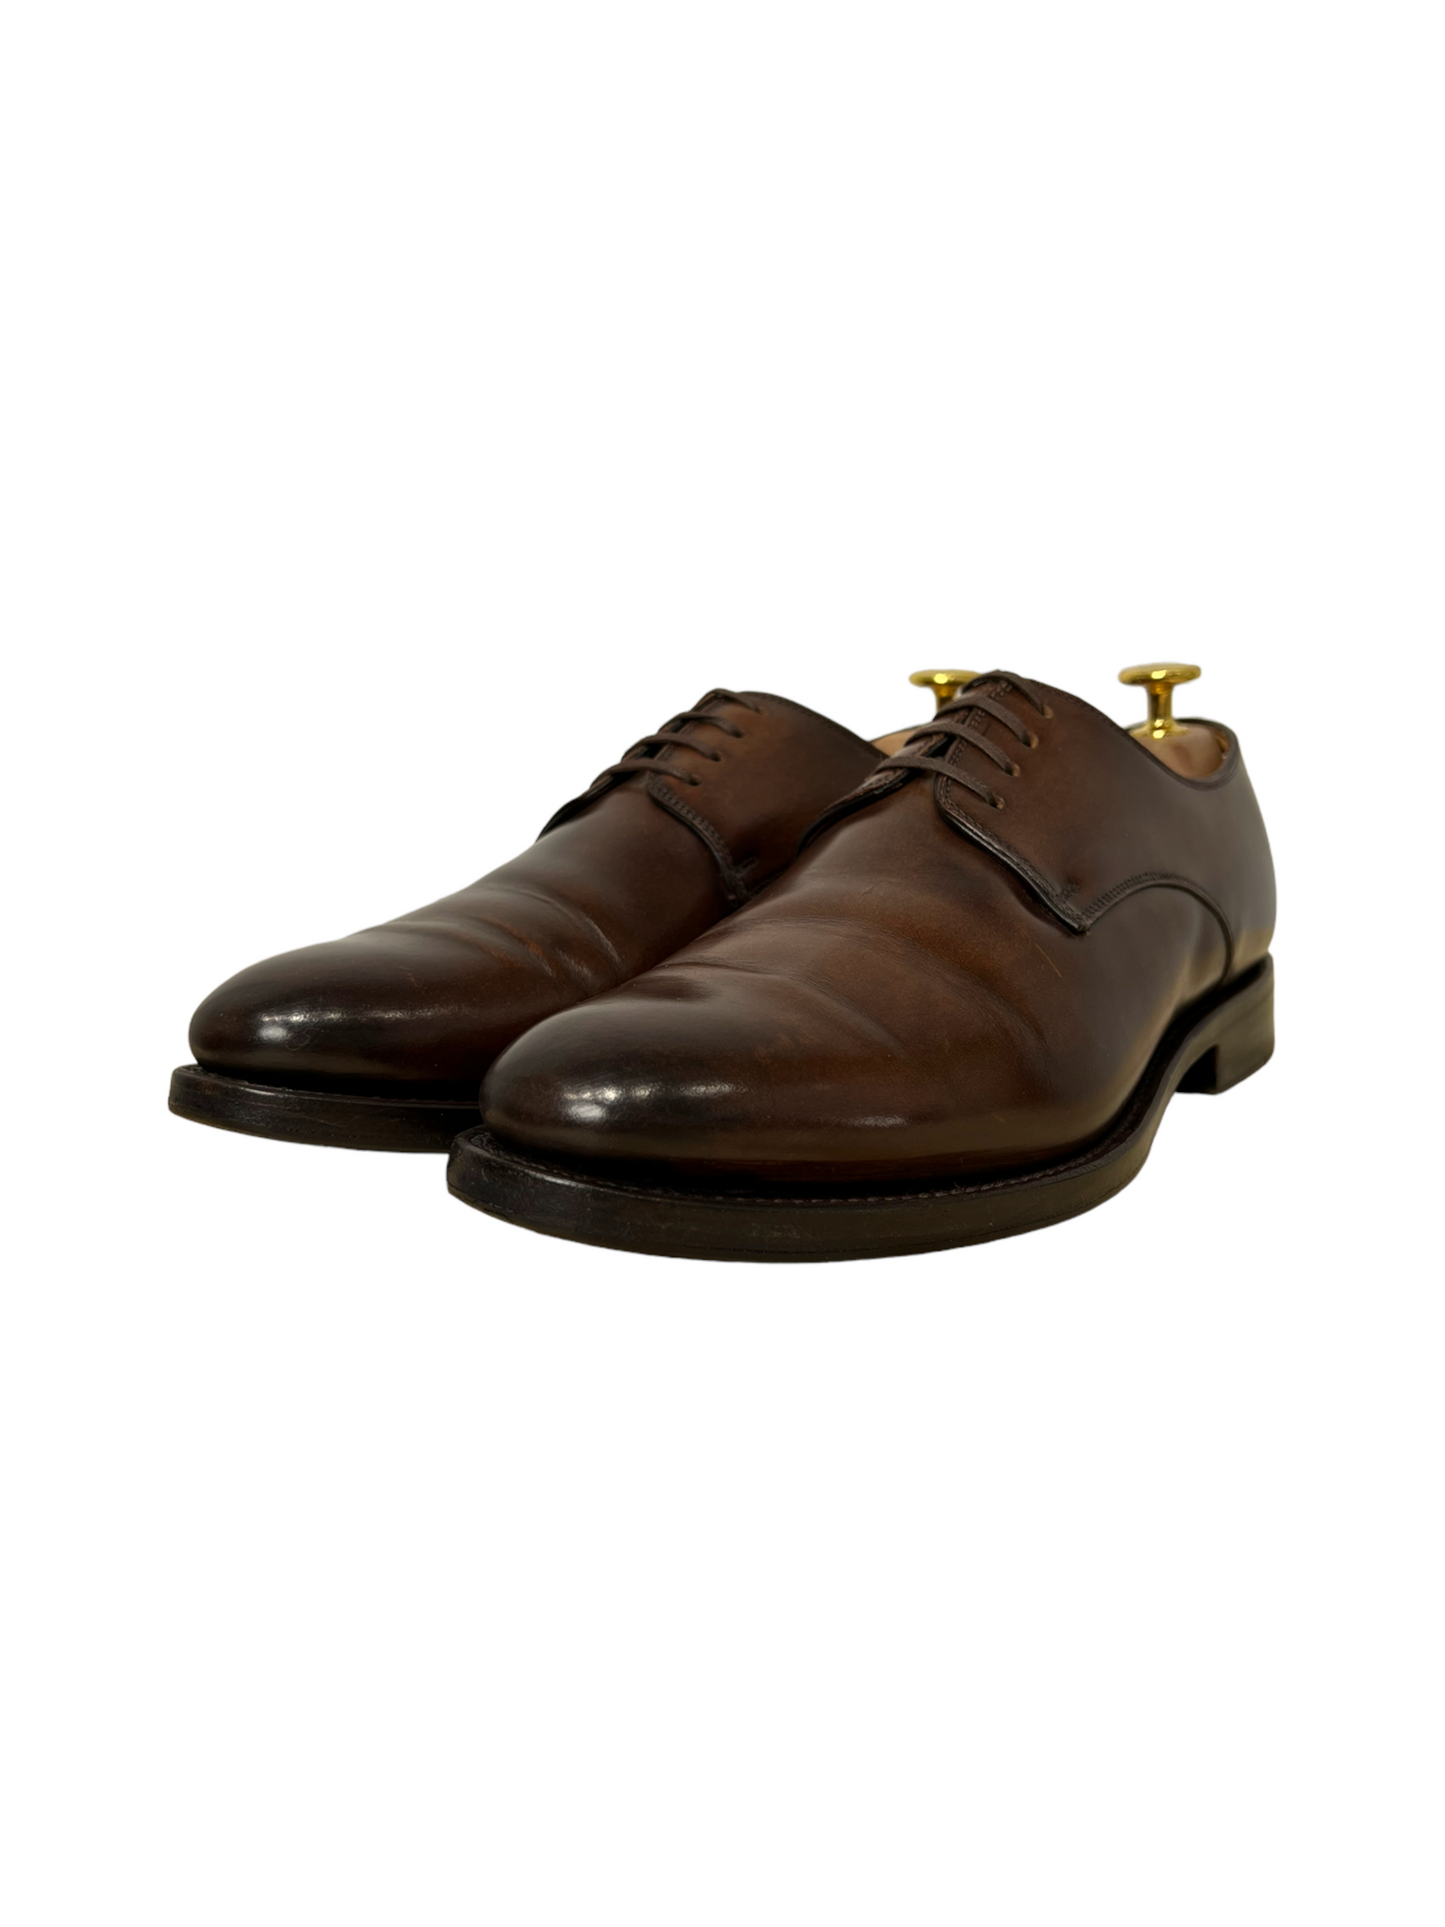 Suitsupply Brown Leather Derby Dress Shoes - Genuine Design Luxury Consignment for Men. New & Pre-Owned Clothing, Shoes, & Accessories. Calgary, Canada